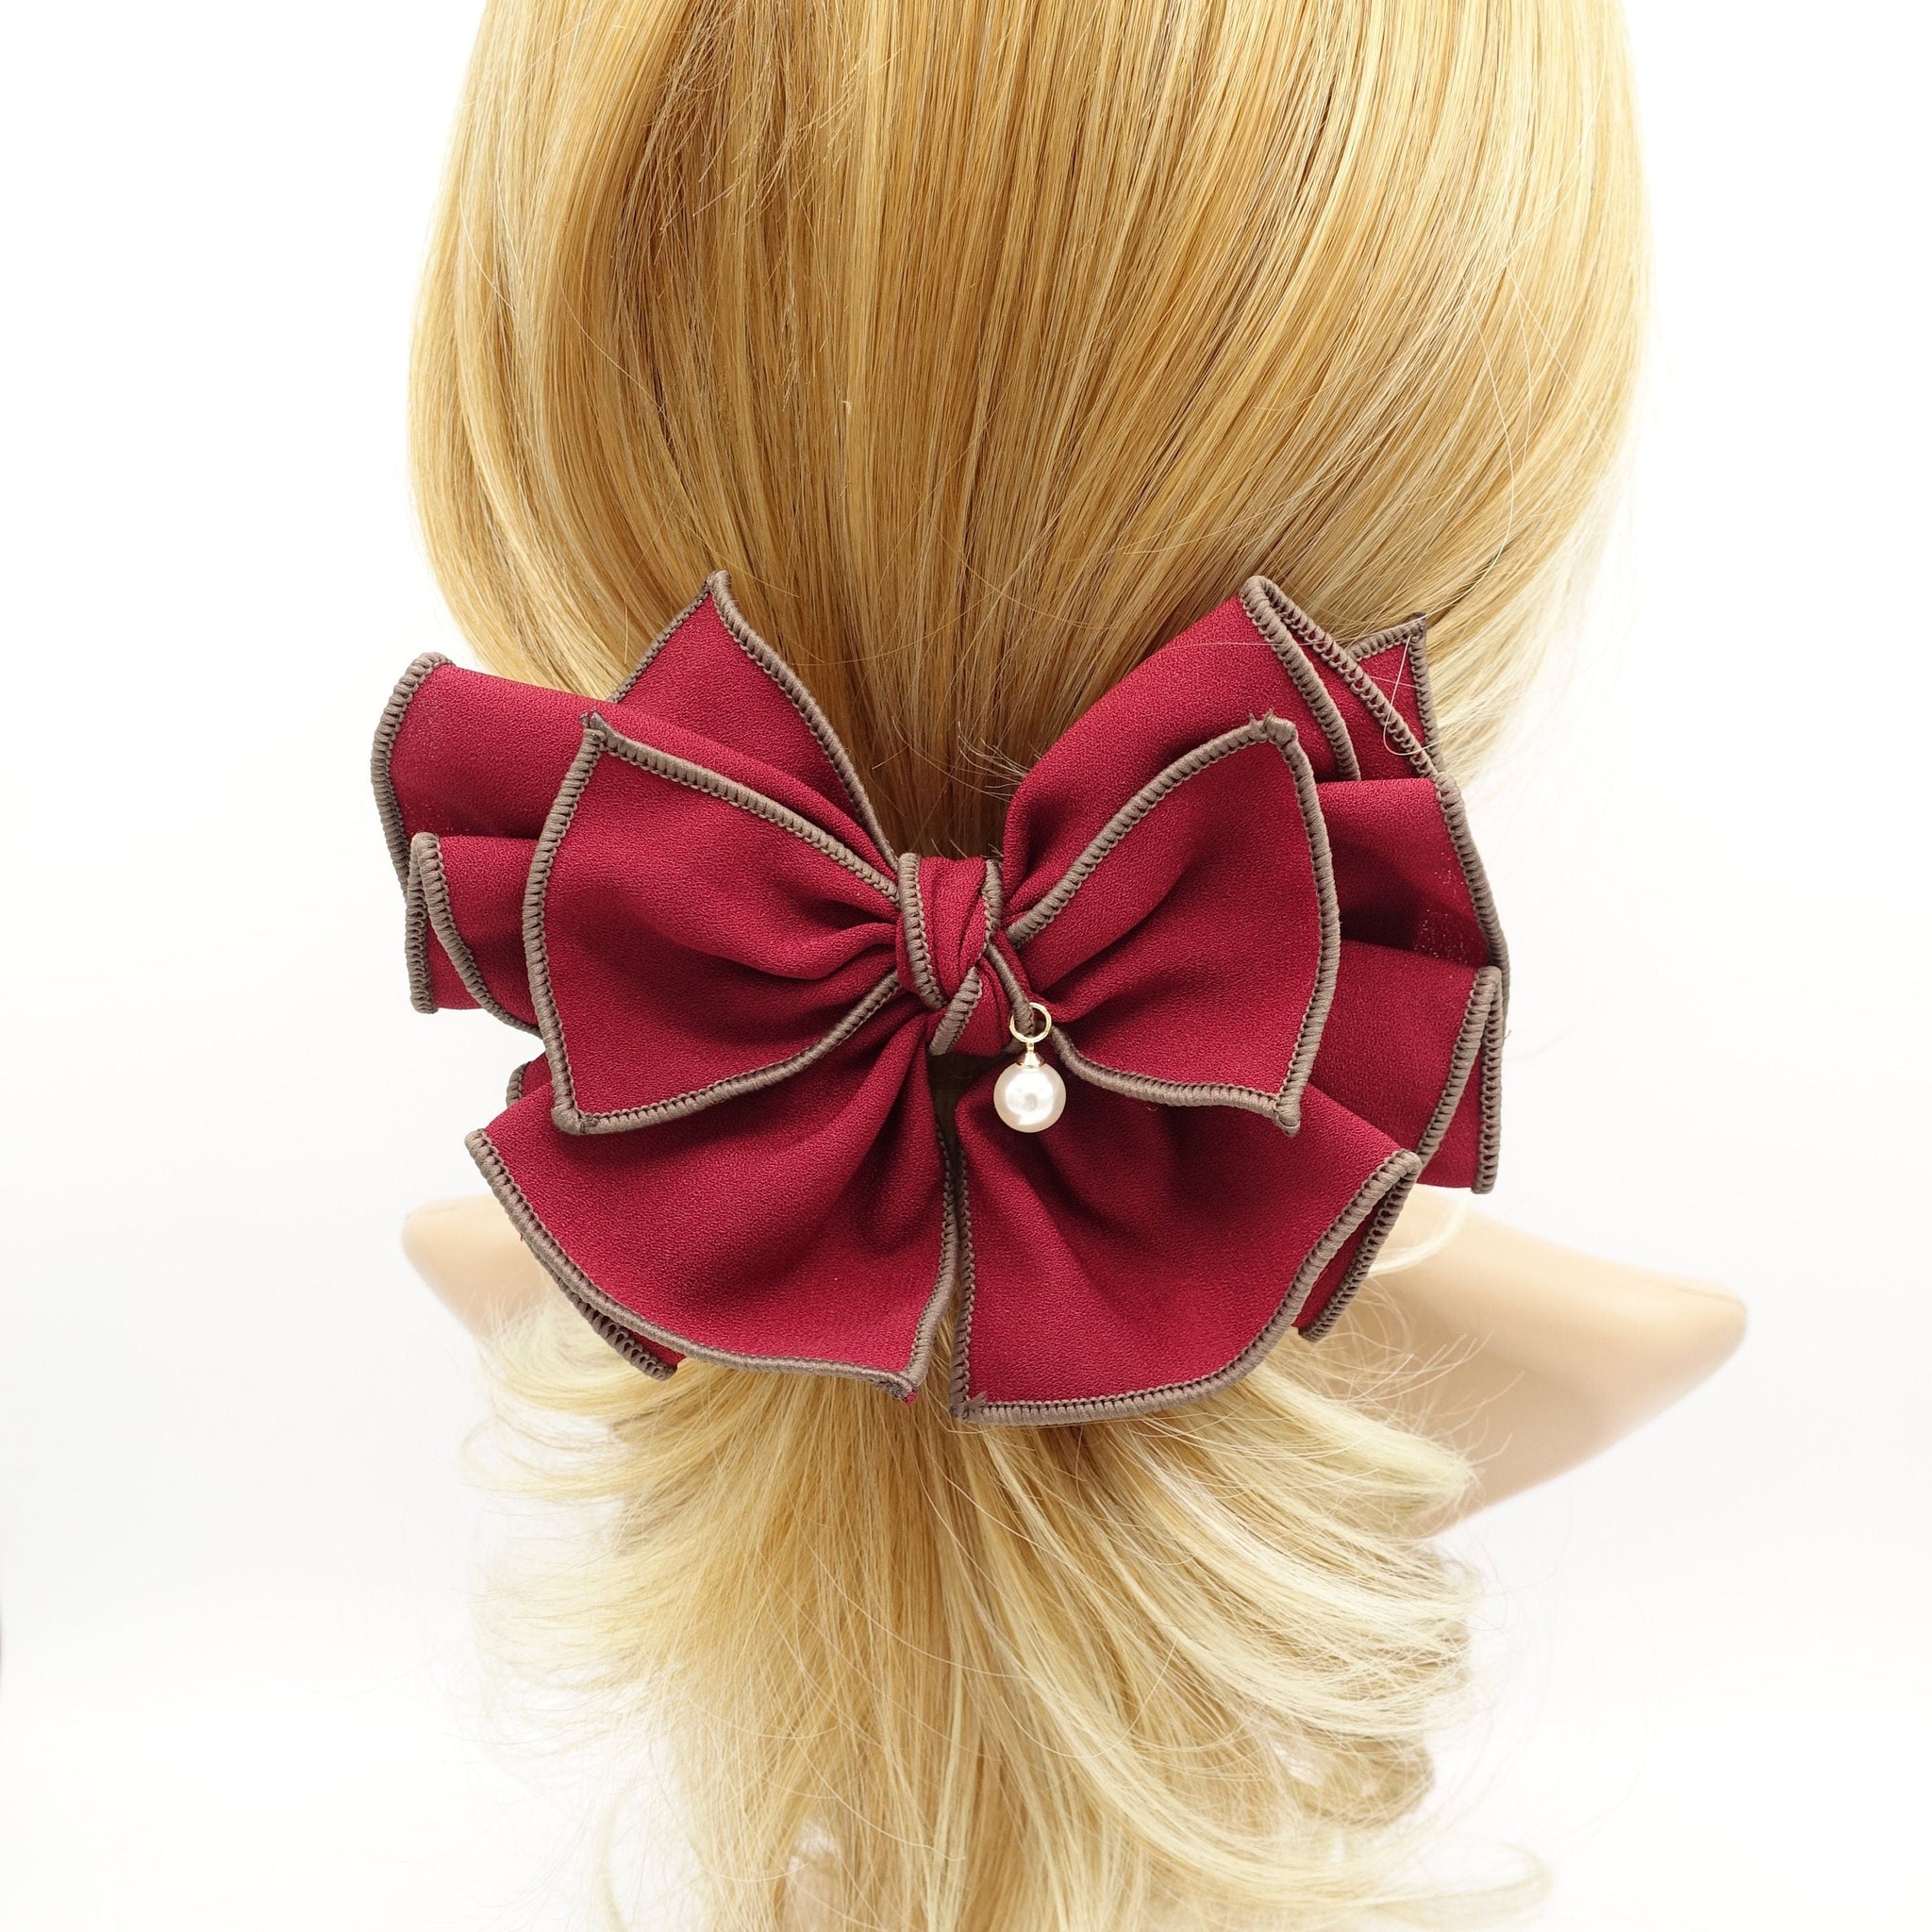 veryshine.com Barrette (Bow) Red wine double colored edge hair bow pleated women hair accessory